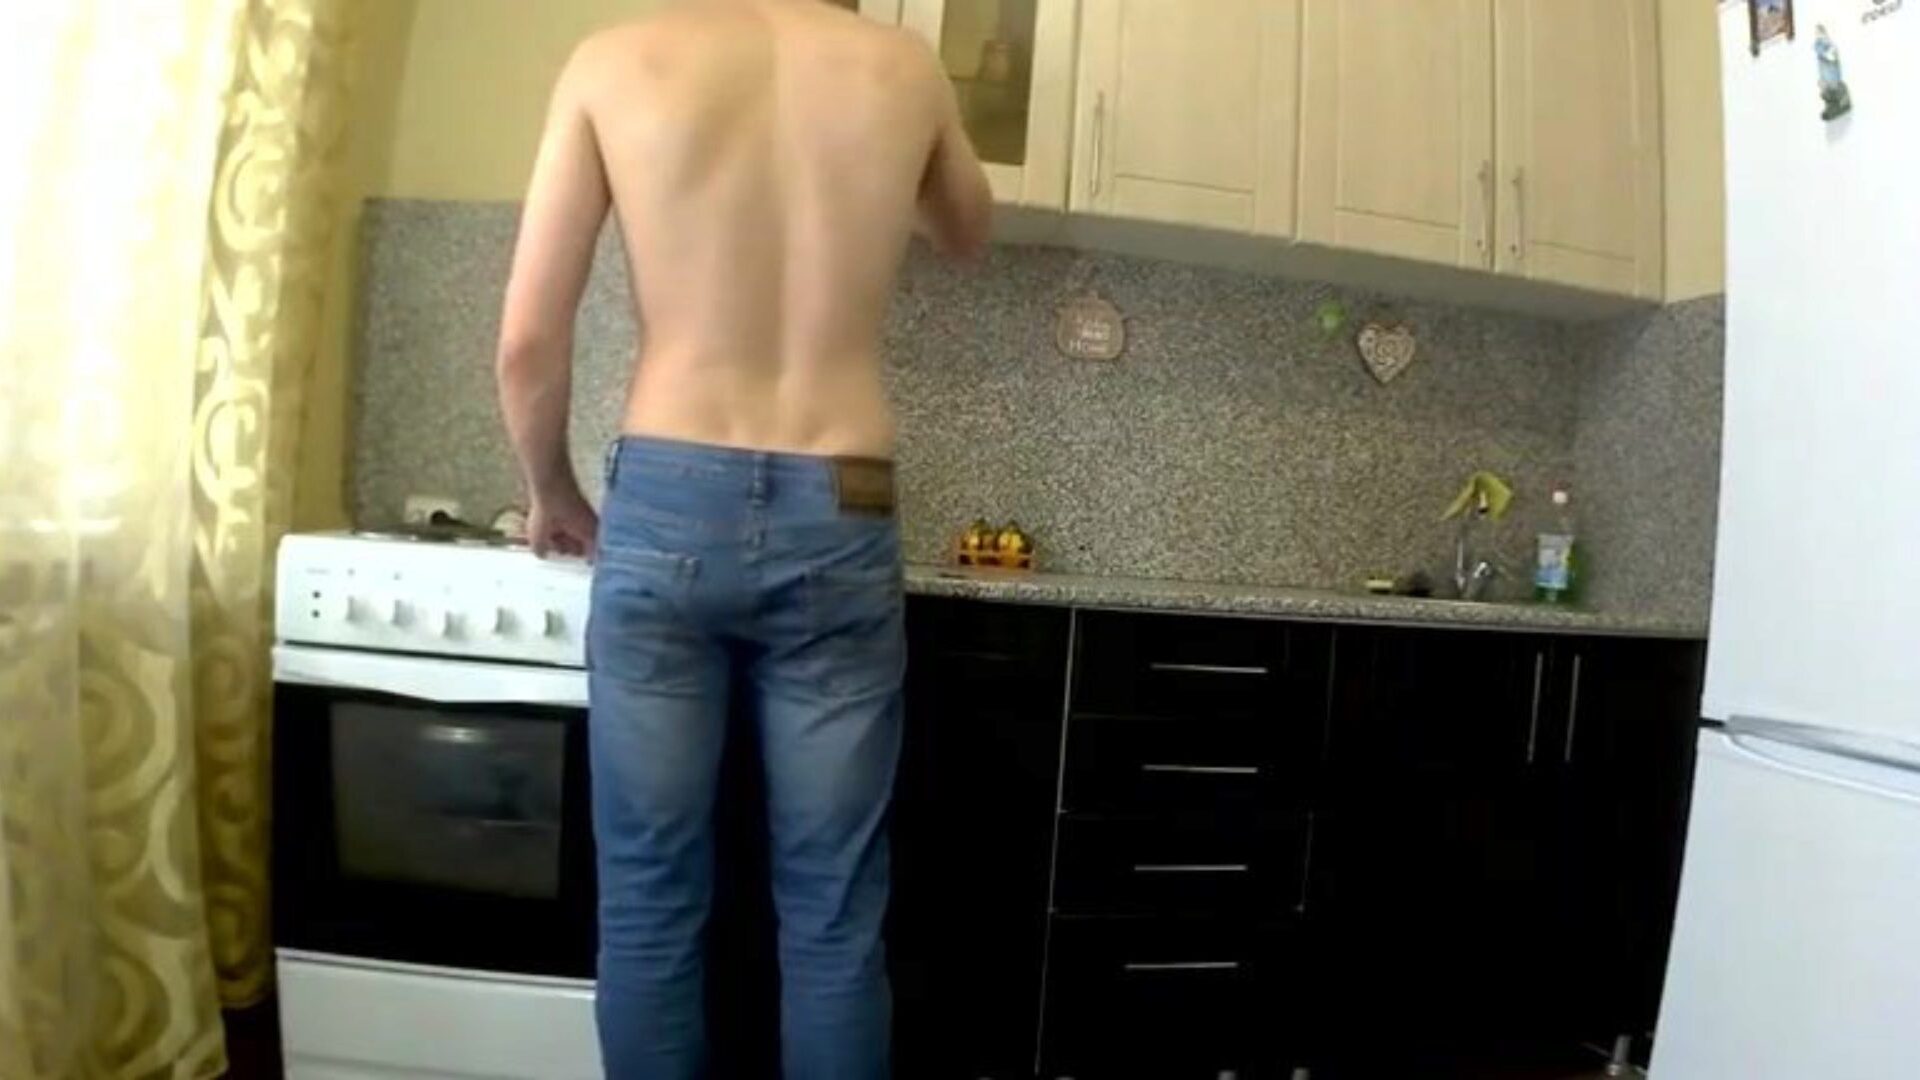 Non-Professional cunt and butt fuck in kitchen